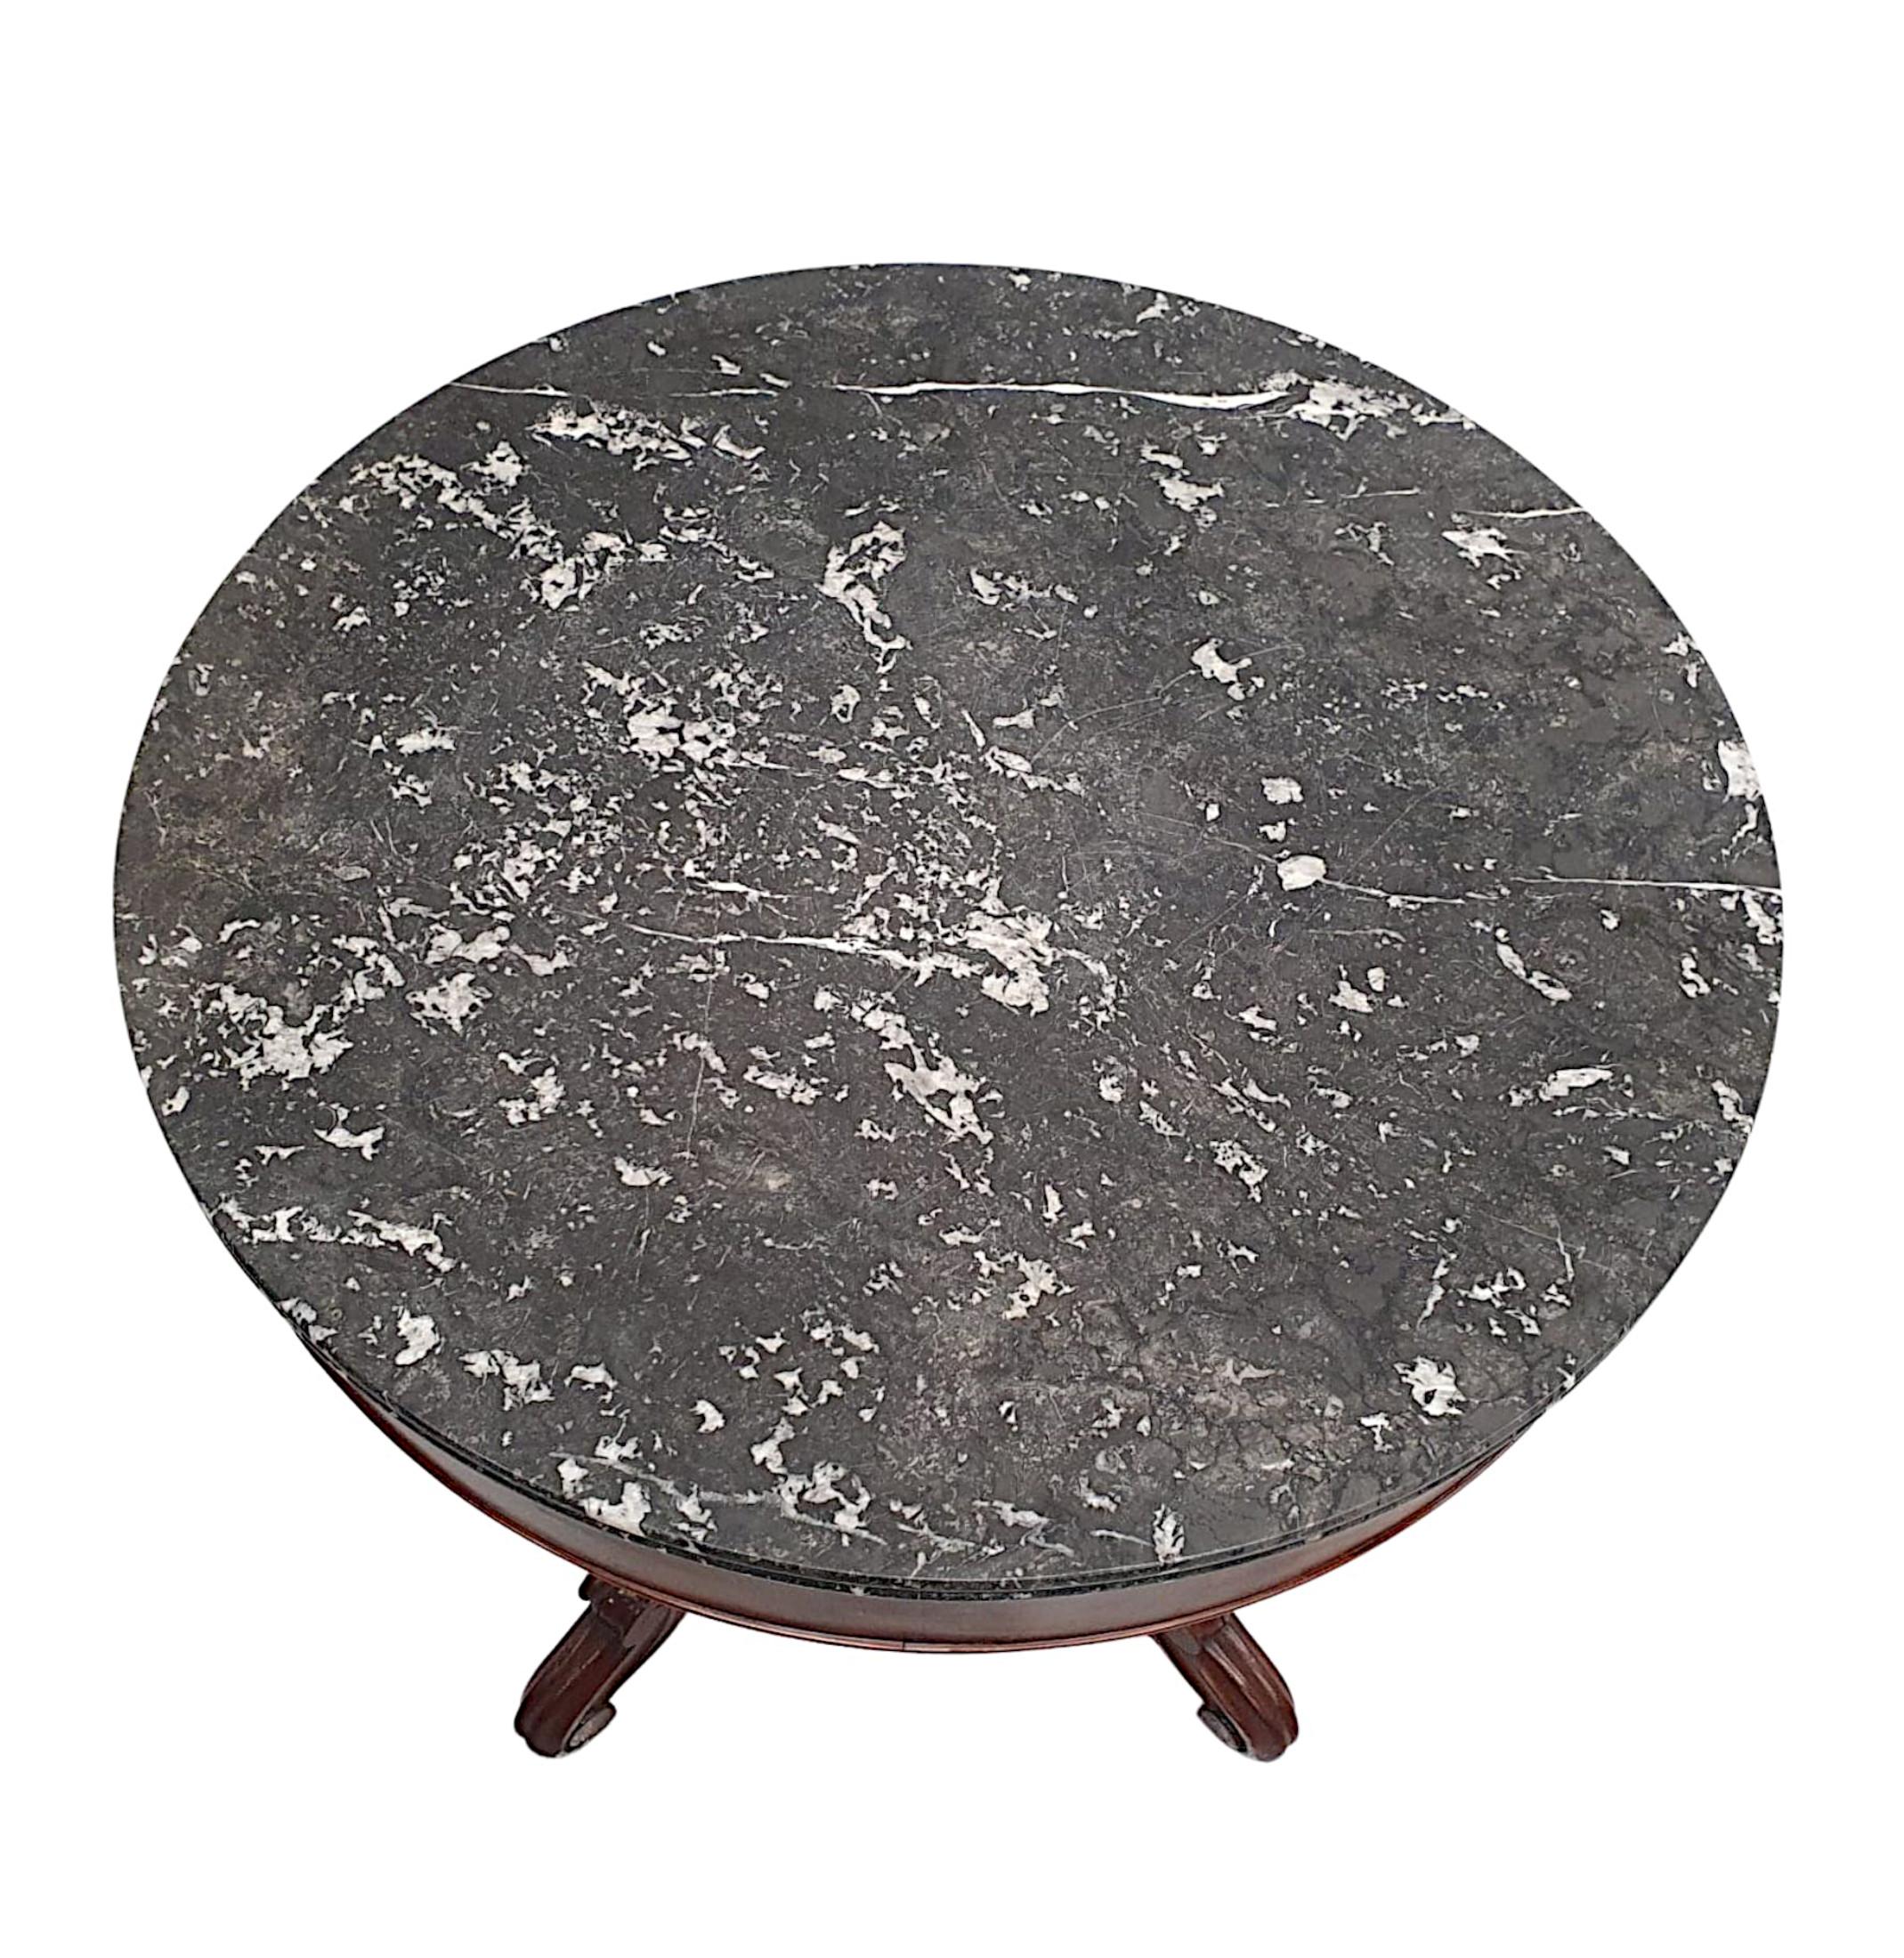 A fabulous 19th Century mahogany marble top centre table, of neat proportions, fantastic quality and finely hand carved with beautifully rich patination and grain.  The stunning moulded, double edged Marquina Black marble top of circular from is